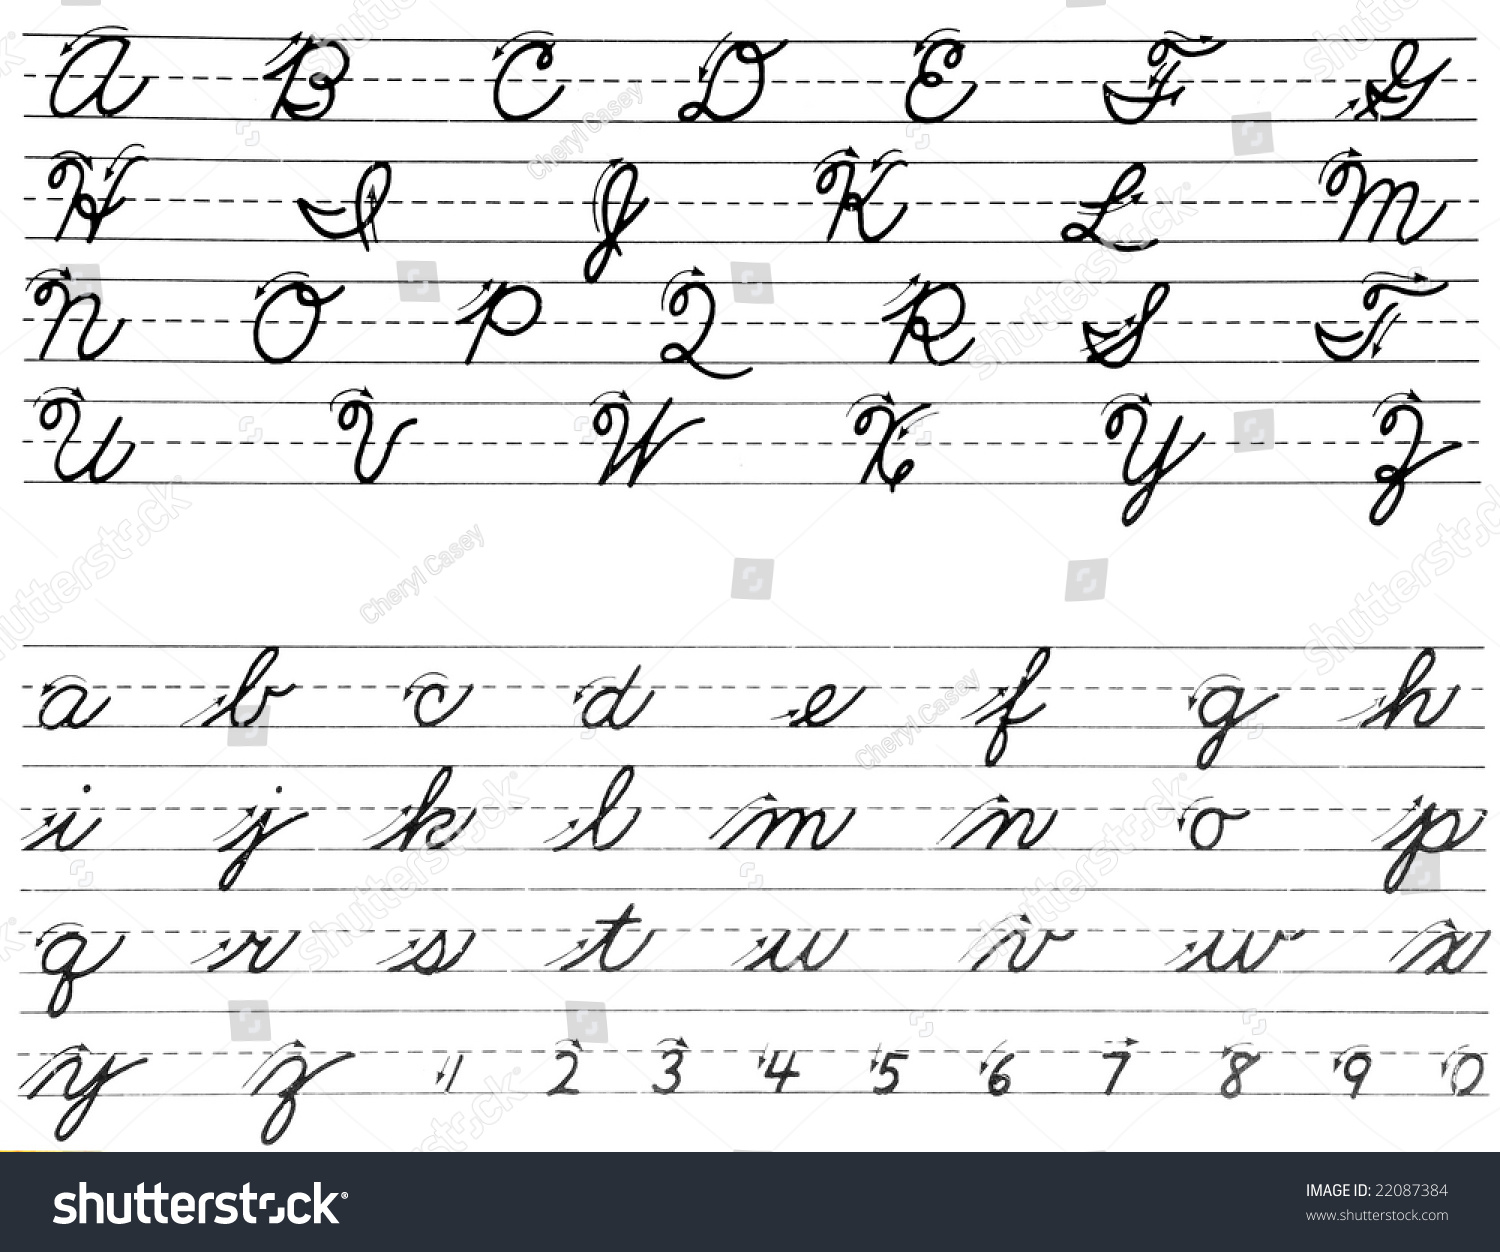 How To Write In Old Fashioned Handwriting 42